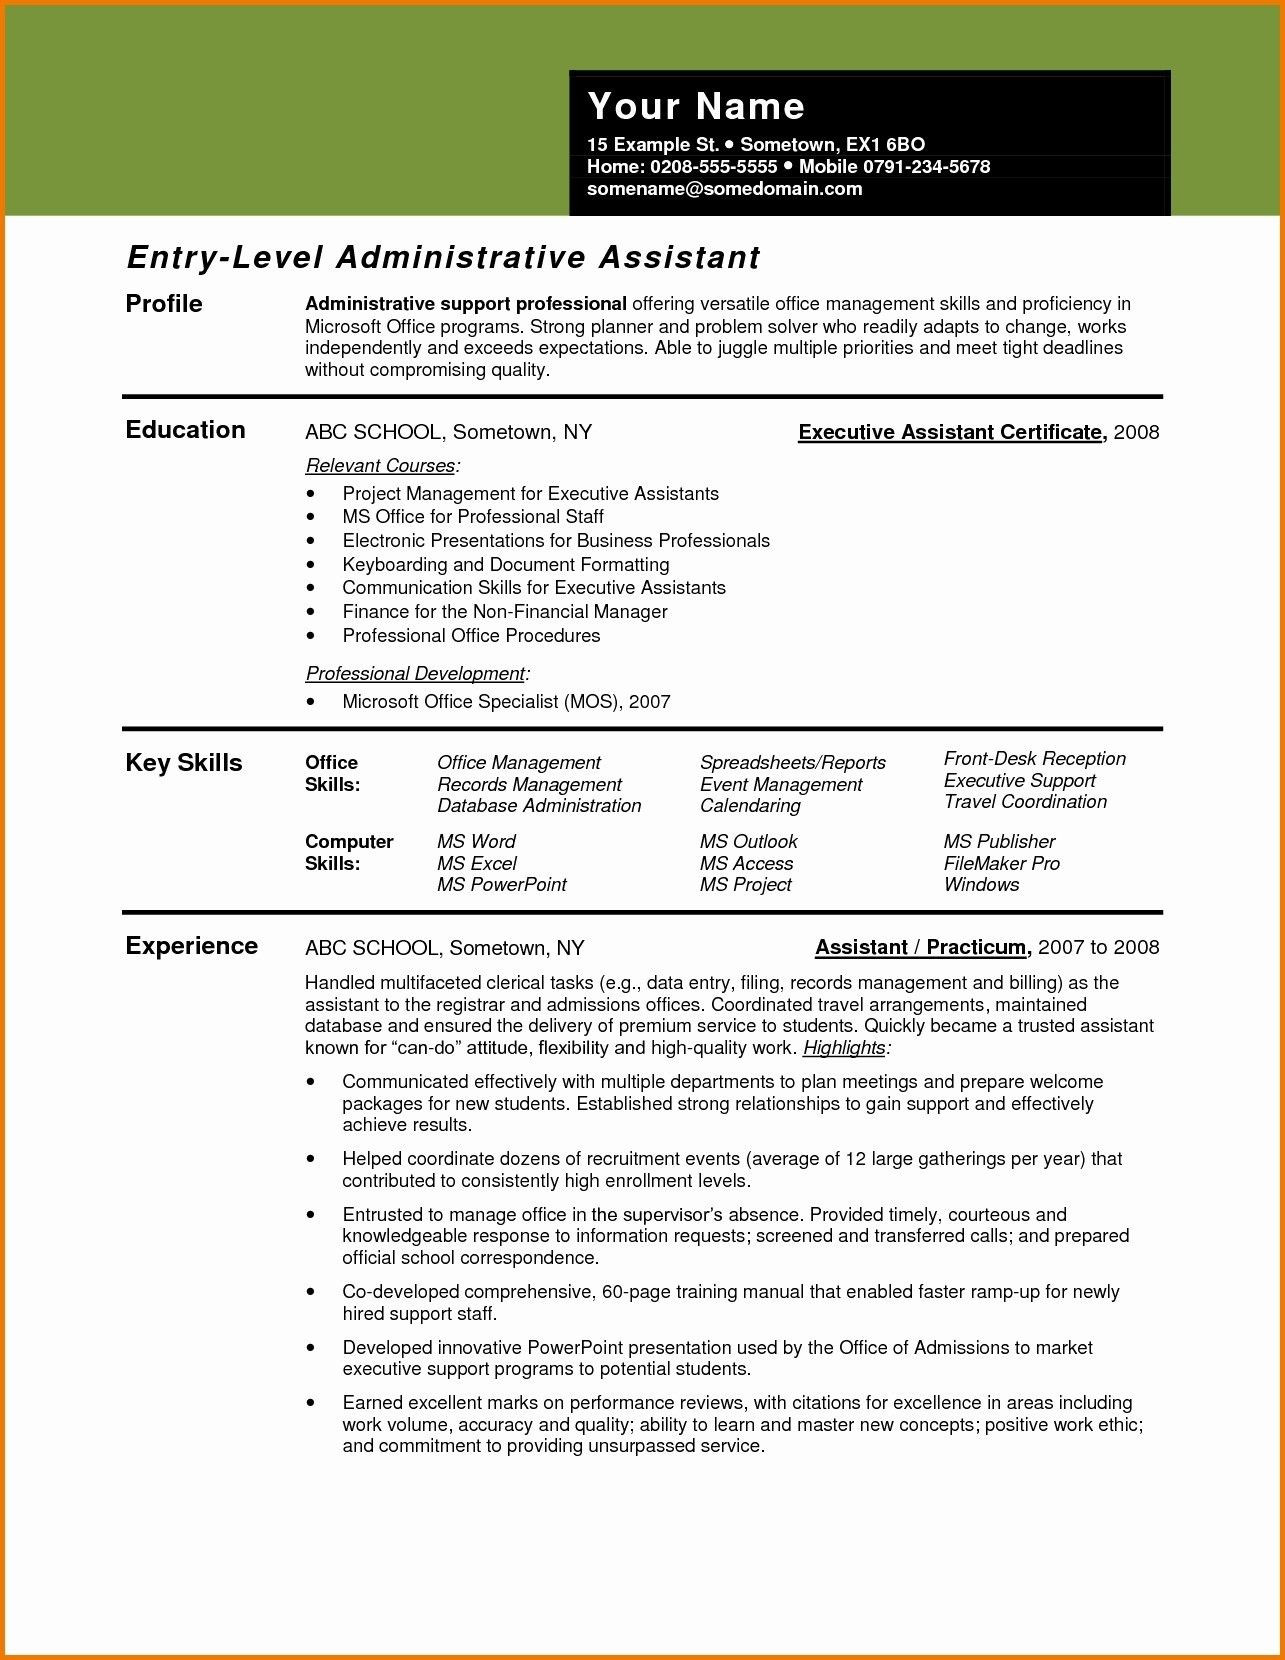 Sample Resume for Career Change to Administrative assistant 67 Beautiful Photos Of Sample Resume for Career Change to …